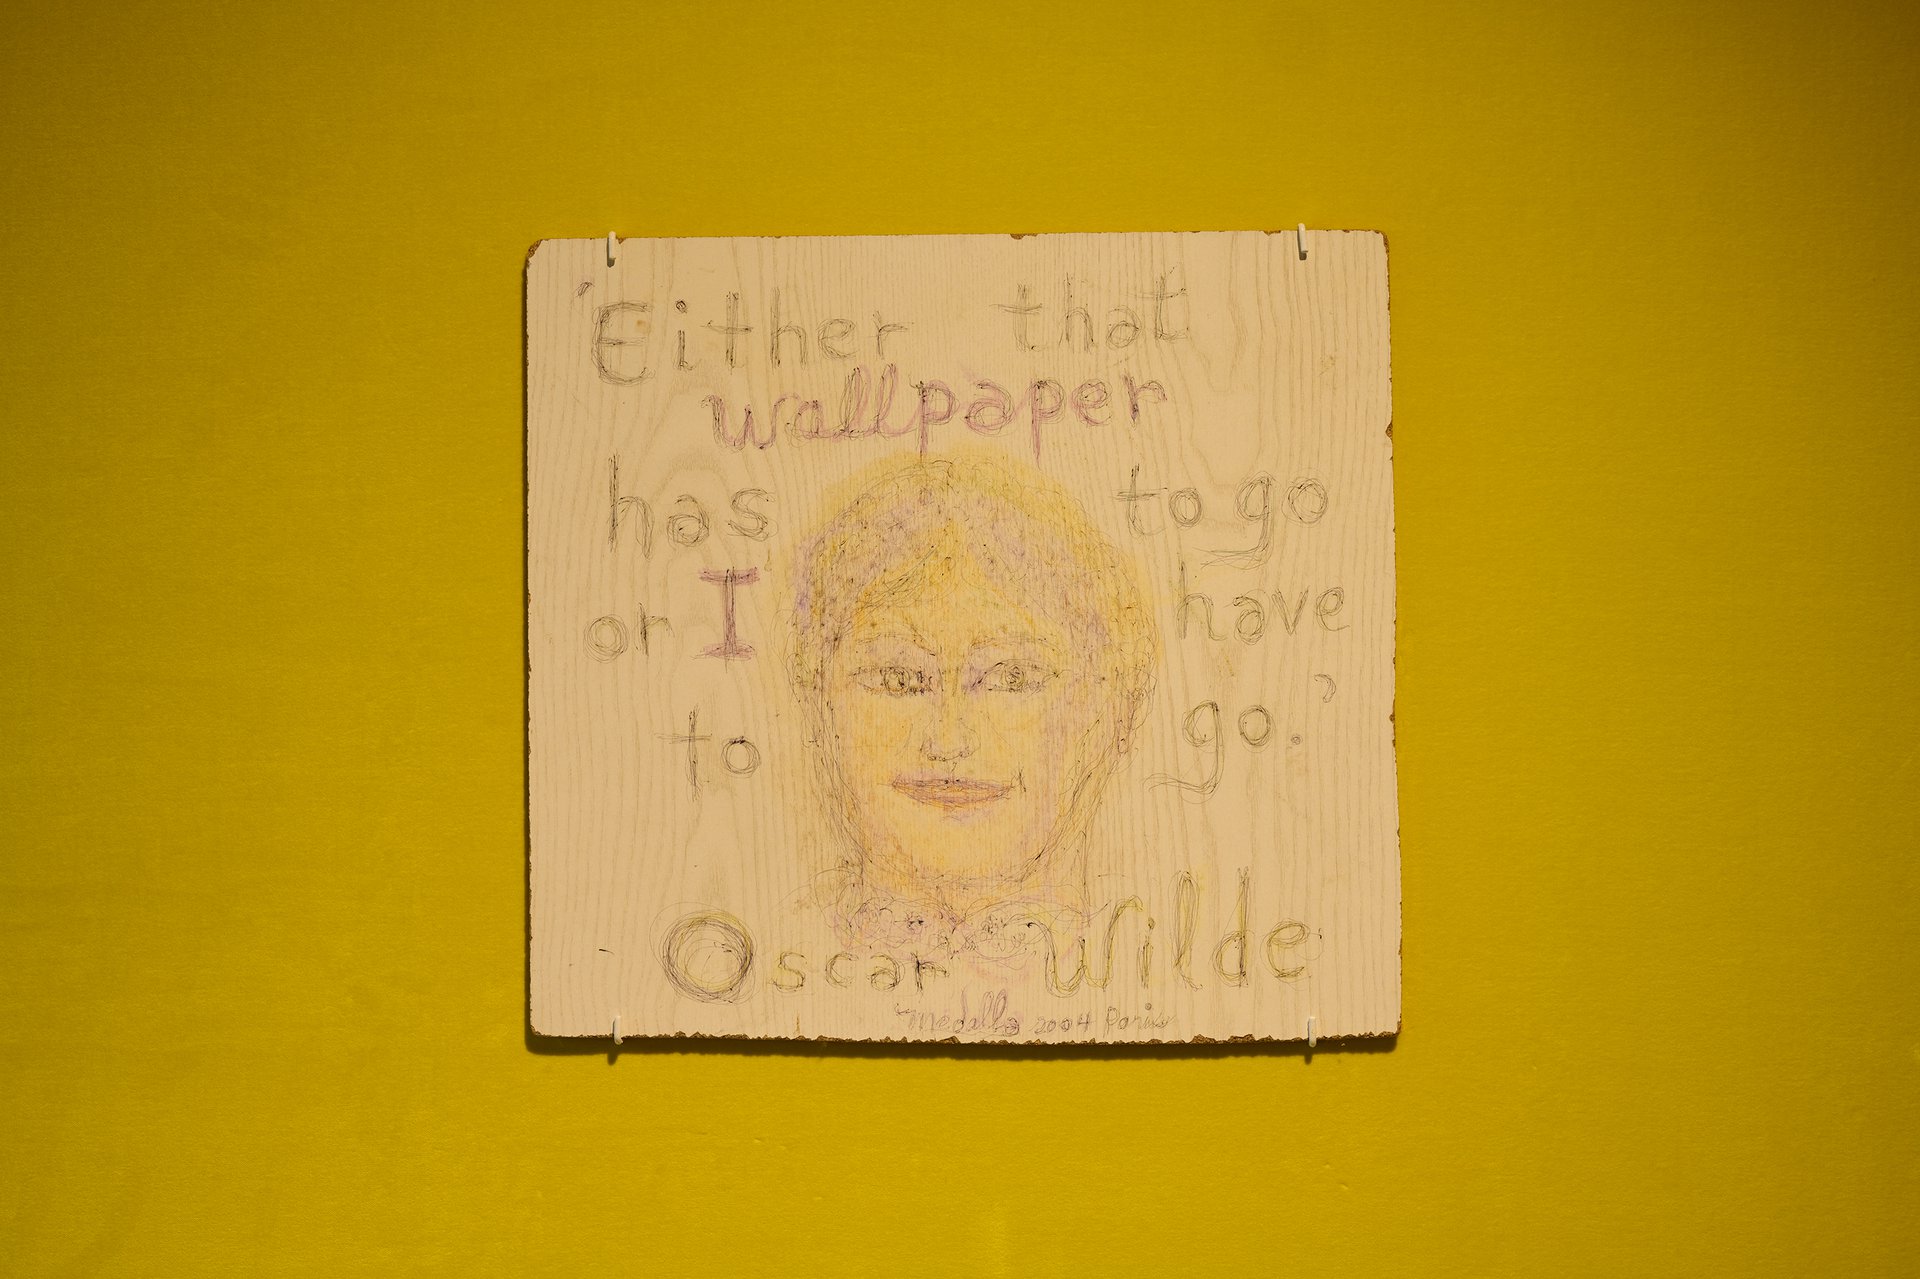 David Medalla, &#x27;Either that wallpaper has to go or I have to go.&#x27;, 2004, biro and colour pencil on laminated pressboard, 40,8 x 3,3 x 0,7 cm, Bonner Kunstverein, 2021. Photo: Mareike Tocha.